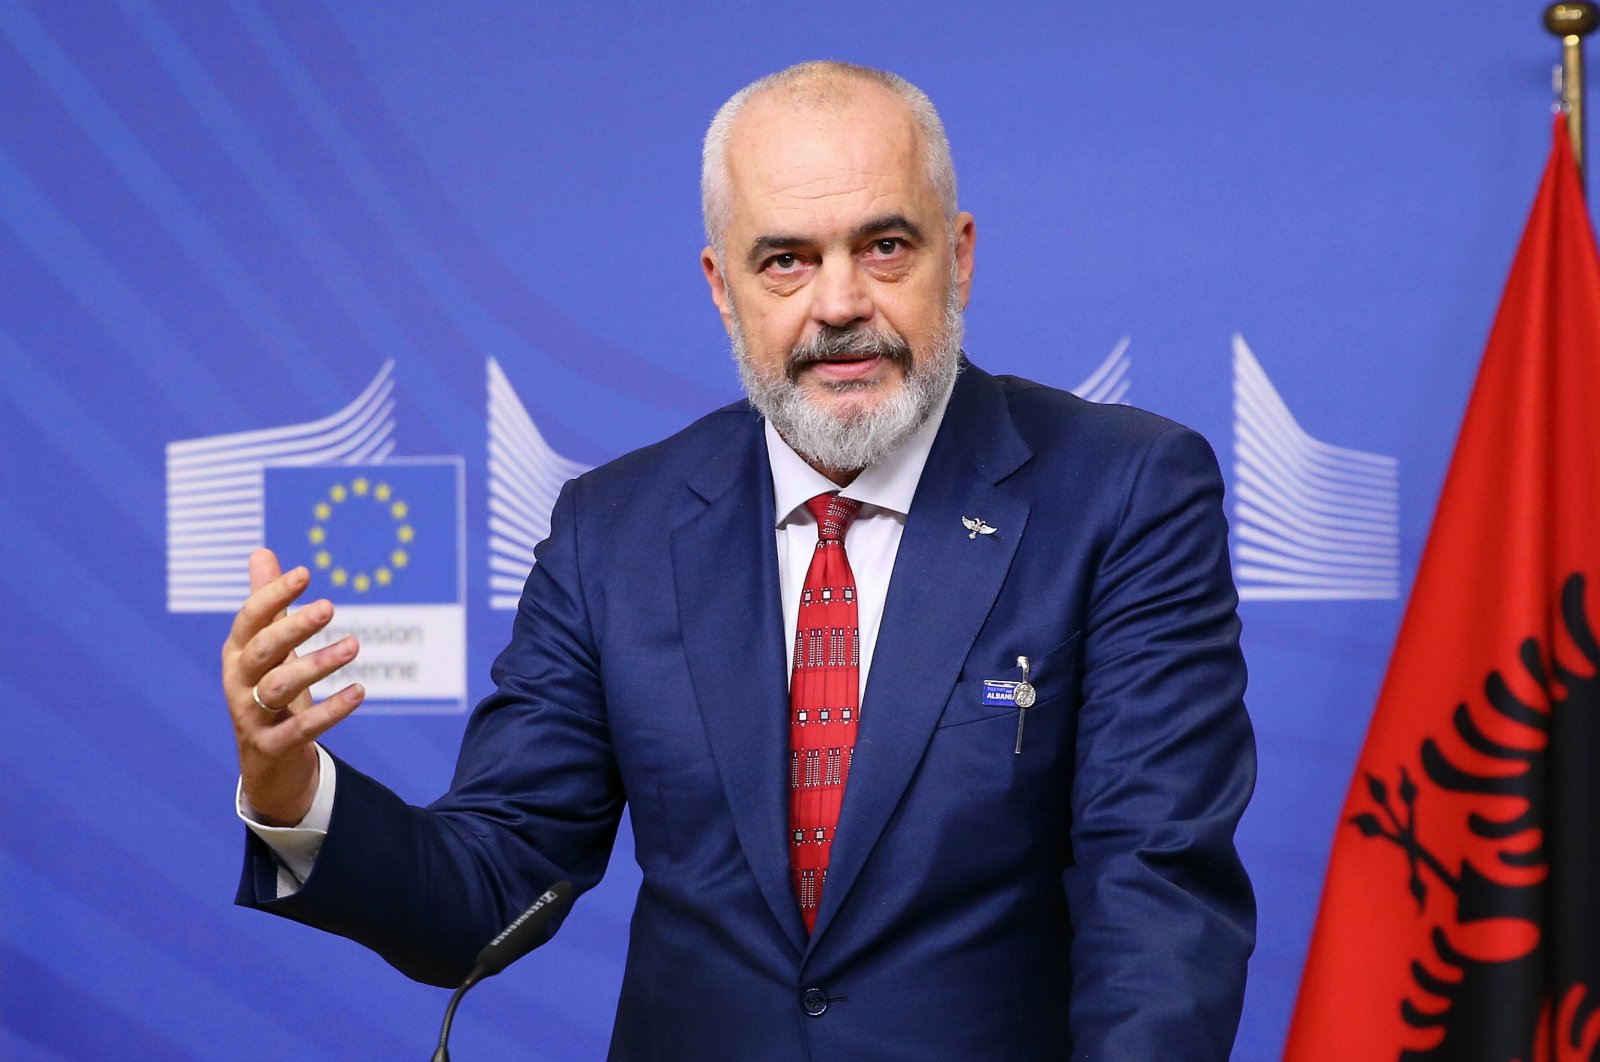 Albanian Prime Minister Edi Rama speaks during a joint press conference with the president of the European Commission in Brussels, Belgium, Feb. 19, 2020. (AA)